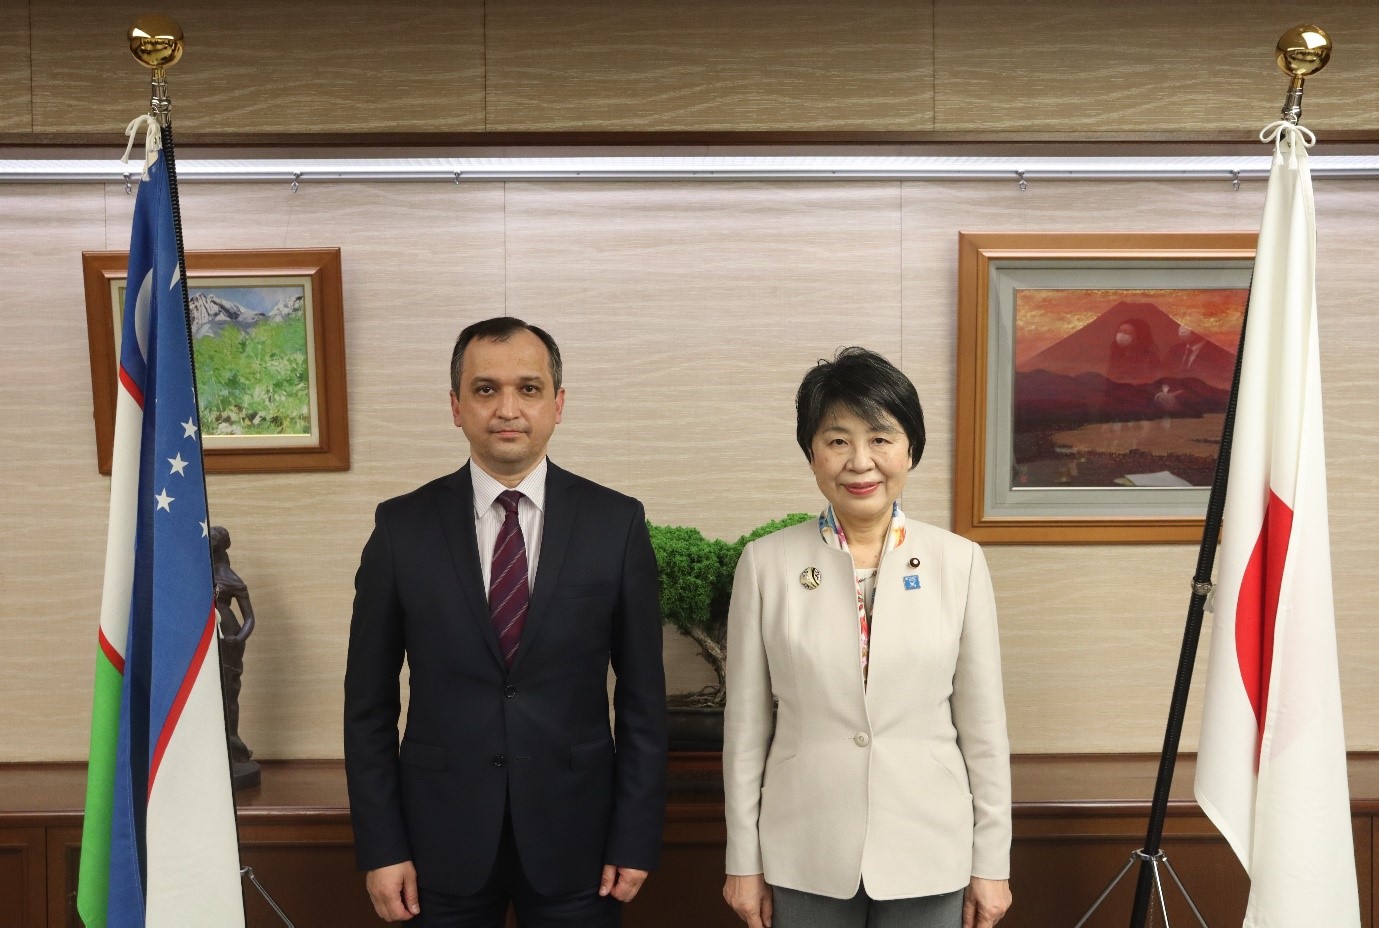 April 15, 2021 Justice Minister Receives Farewell Courtesy Call from Ambassador of the Republic of Uzbekistan in Japan On April 14, 2021.